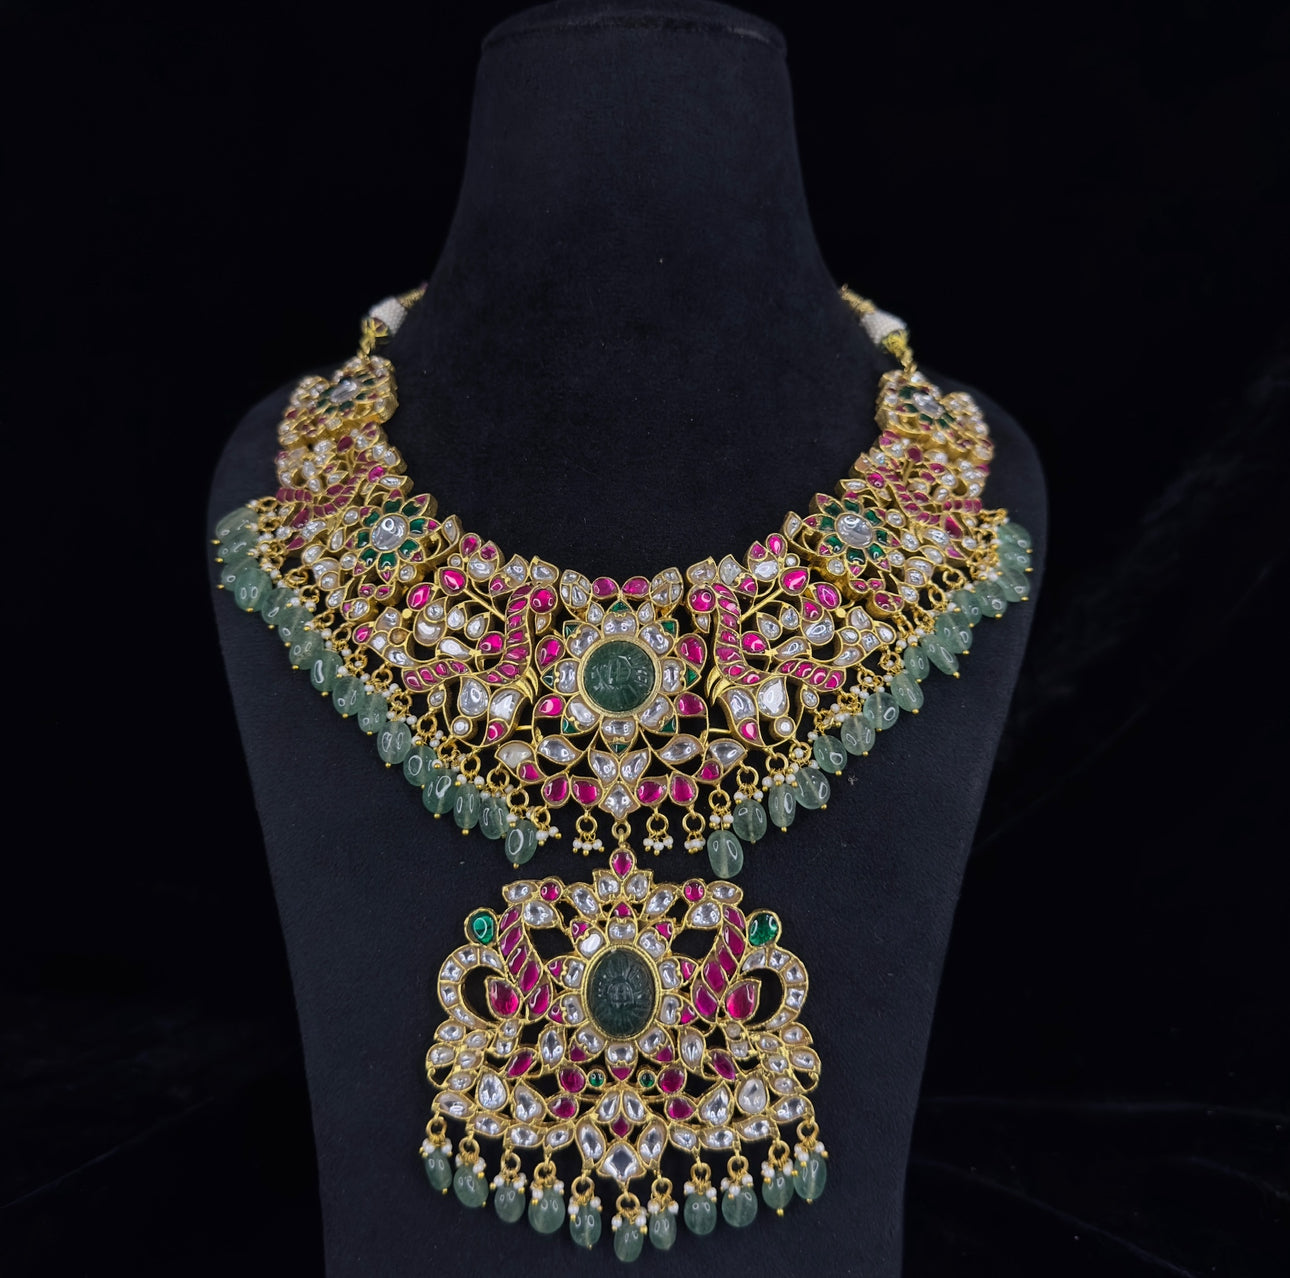 Regal Peacocks Jadau Kundan Necklace with Emerald and Ruby Accents with 22k gold platingThis product belongs to Jadau Kundan jewellery category 